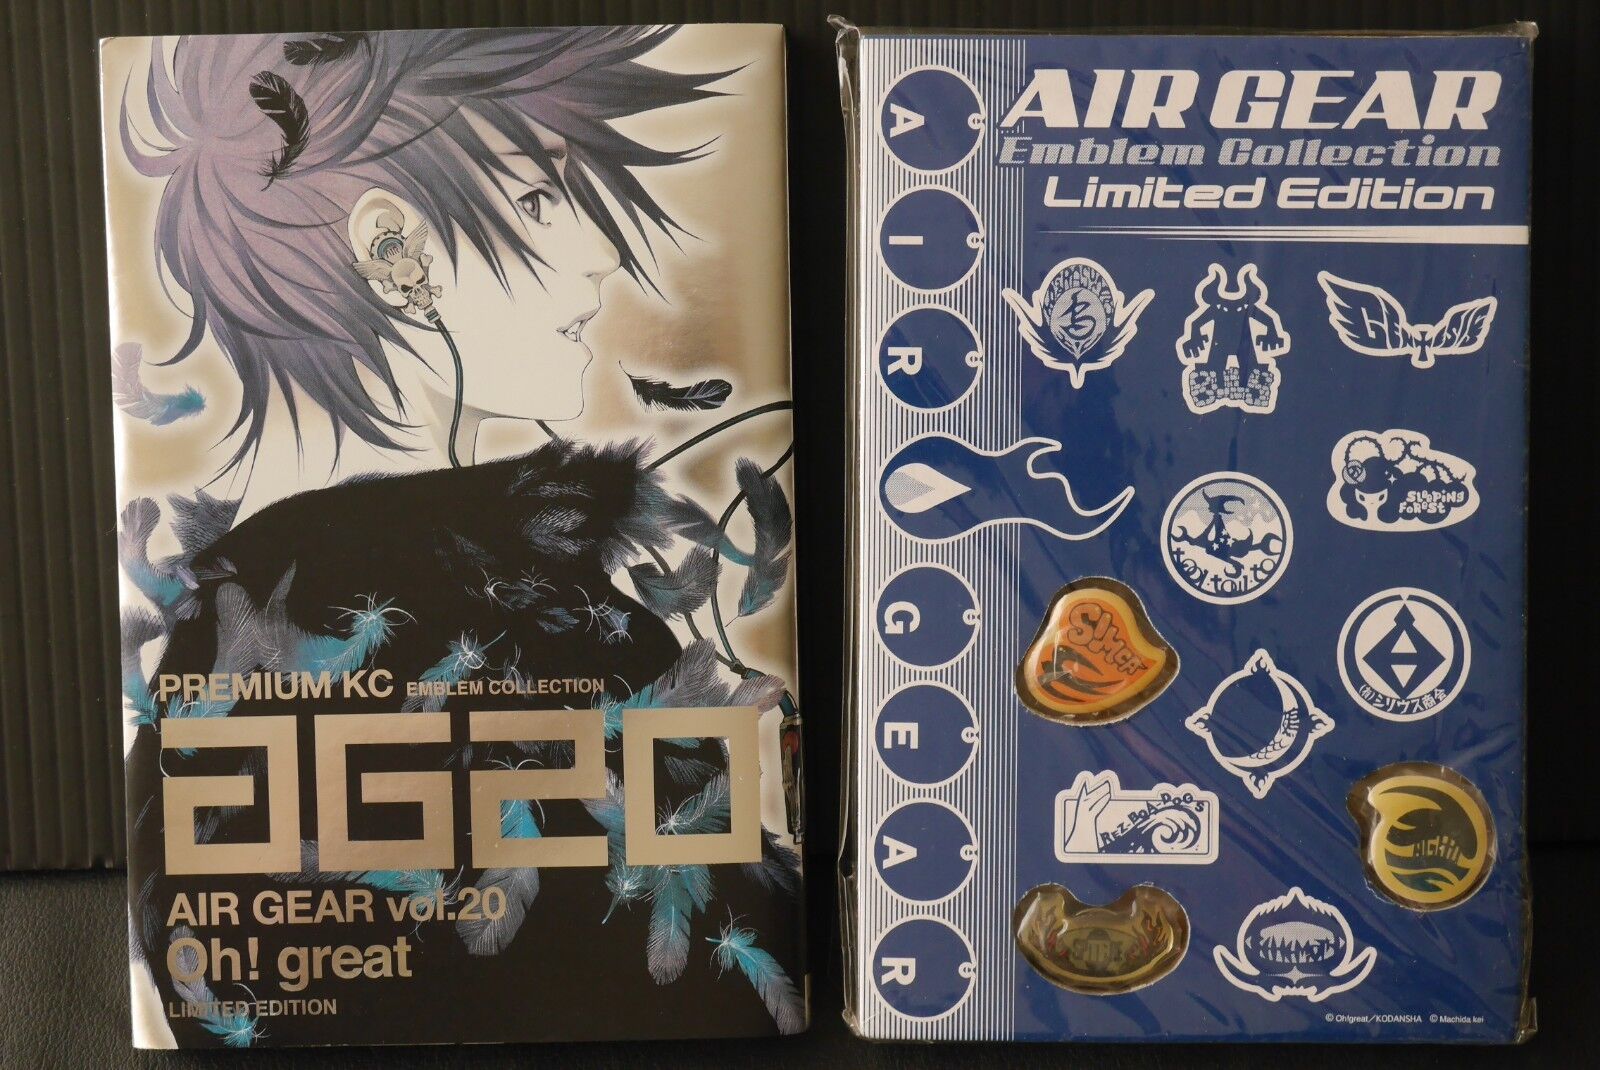 Air Gear vol.20 Limited Edition Manga - by Oh great from JAPAN